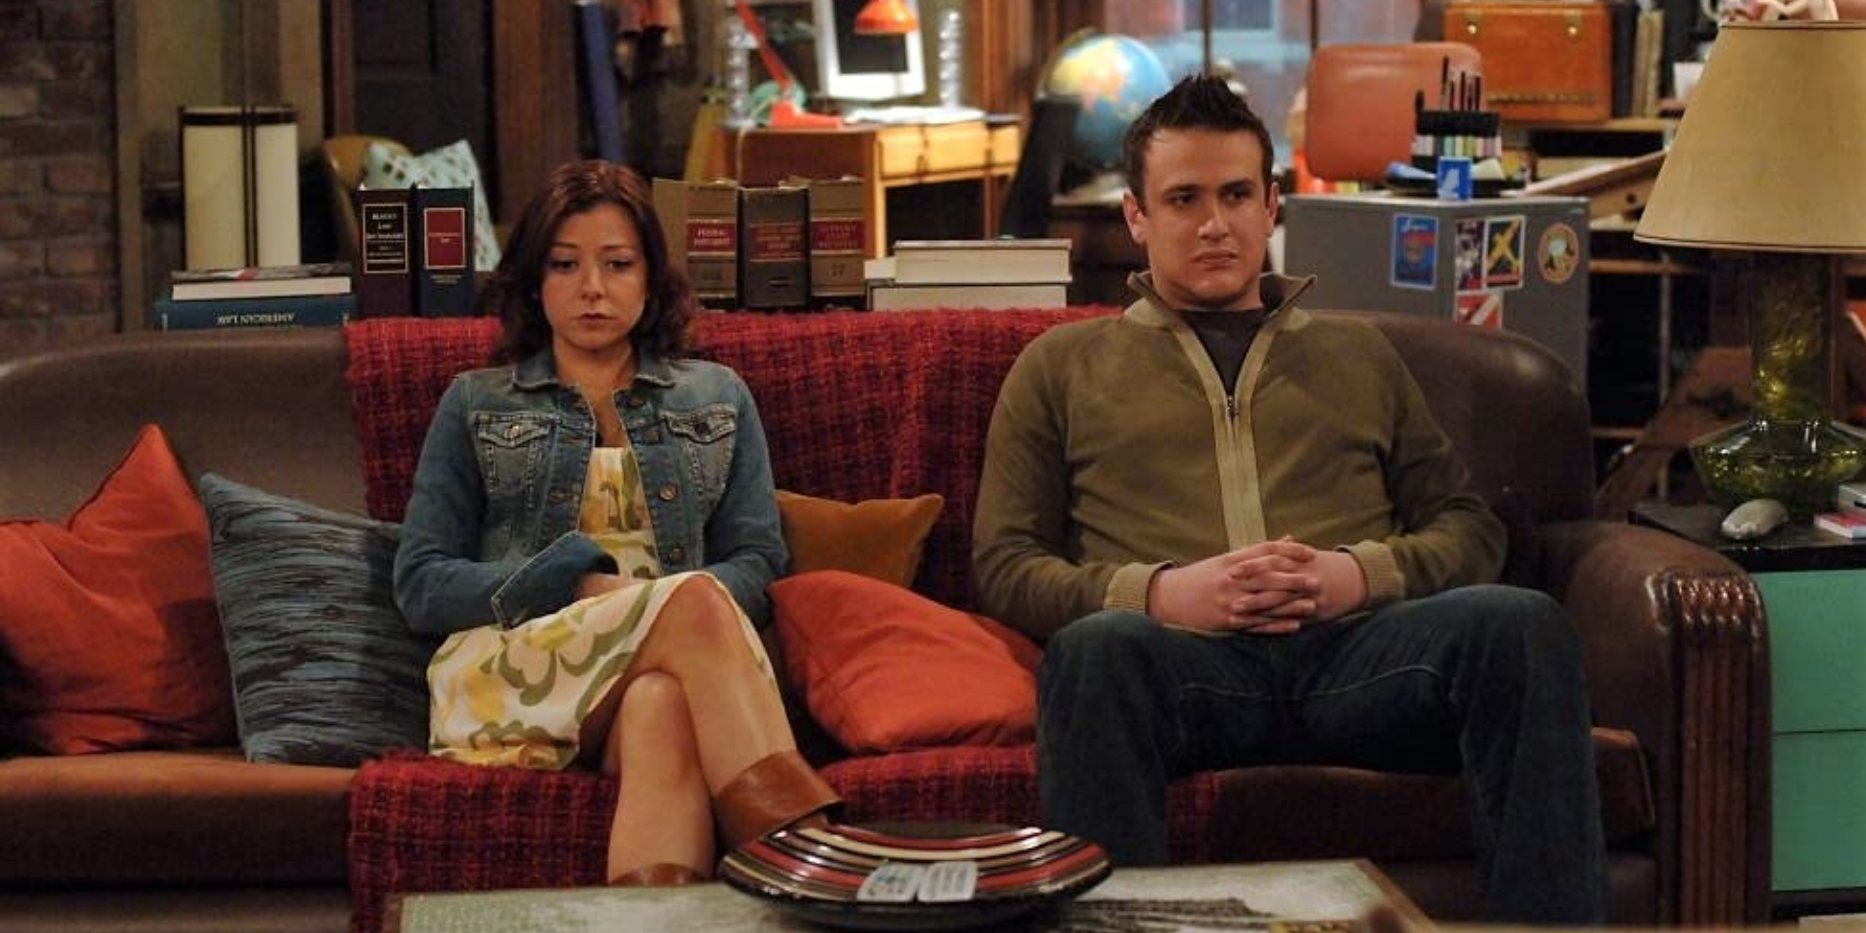 Alyson Hannigan and Jason-Segel sitting on a couch in How I Met Your Mother